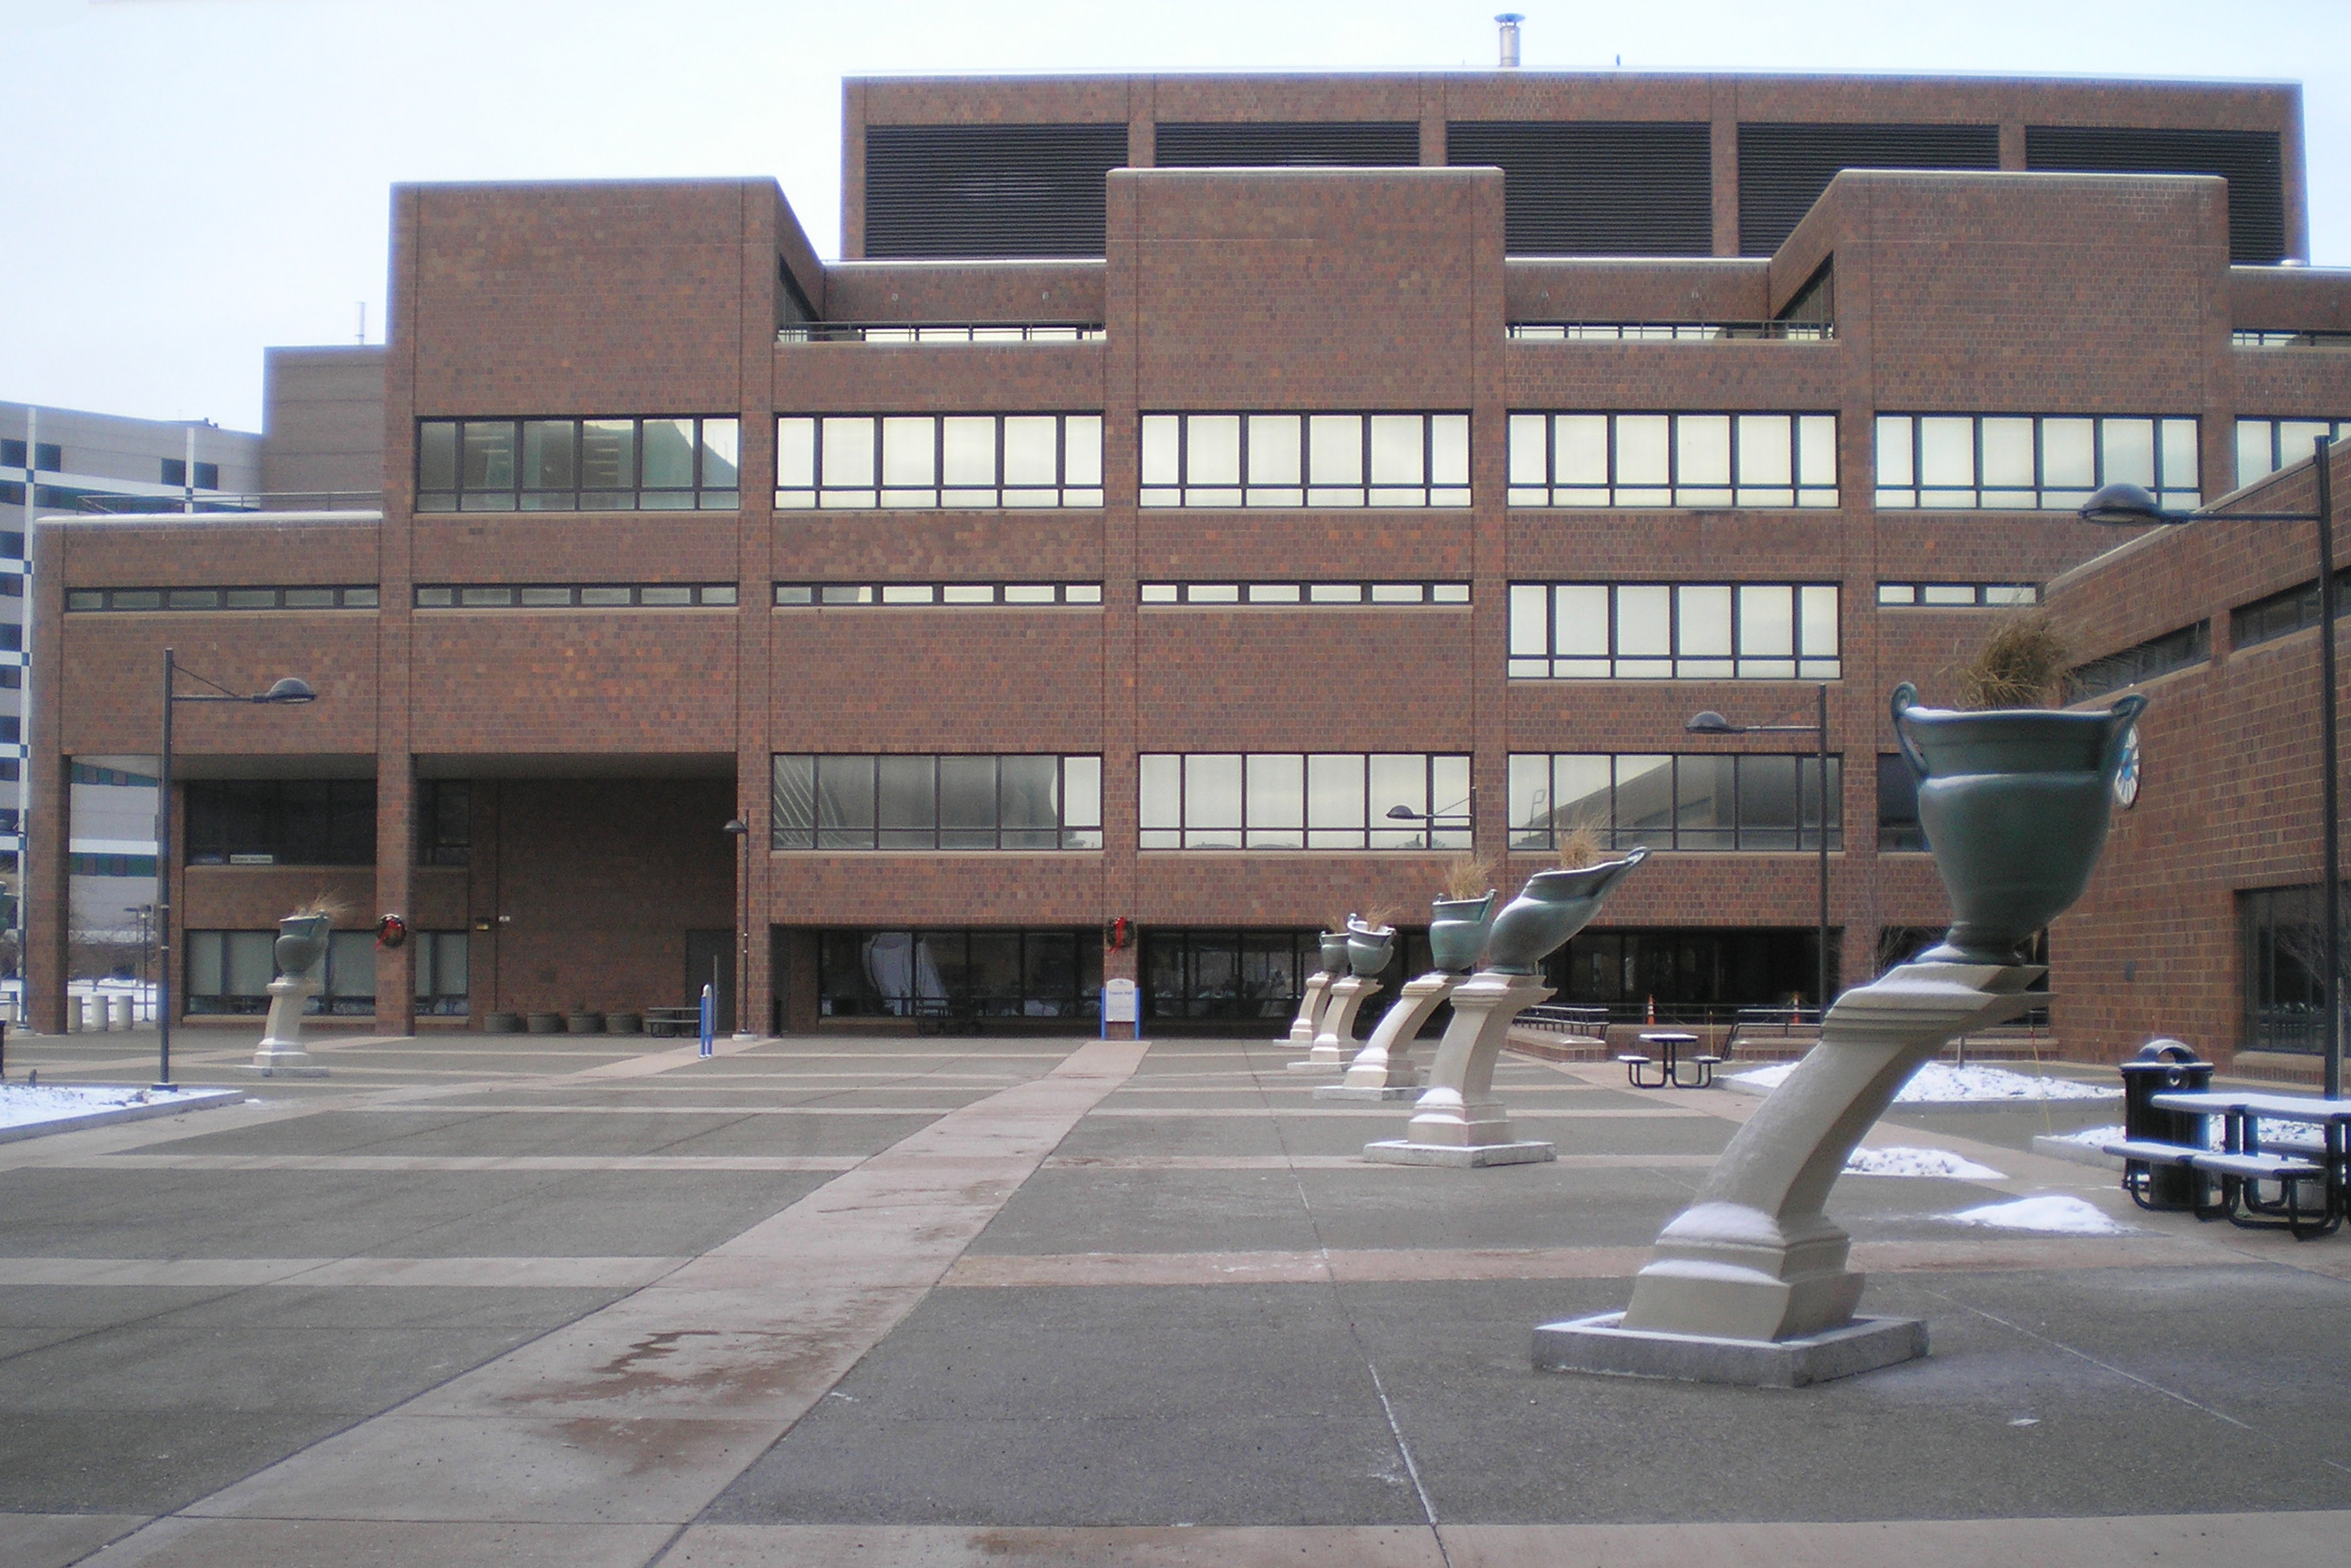 Anti-Semitic graffiti was found in the University at Buffalo's Capen Hall last week. | <a href="https://commons.wikimedia.org/wiki/File%3AUB_NORTH_CAMPUS_C_HALL.jpg">By BarberJP [Public domain], via Wikimedia Commons</a>